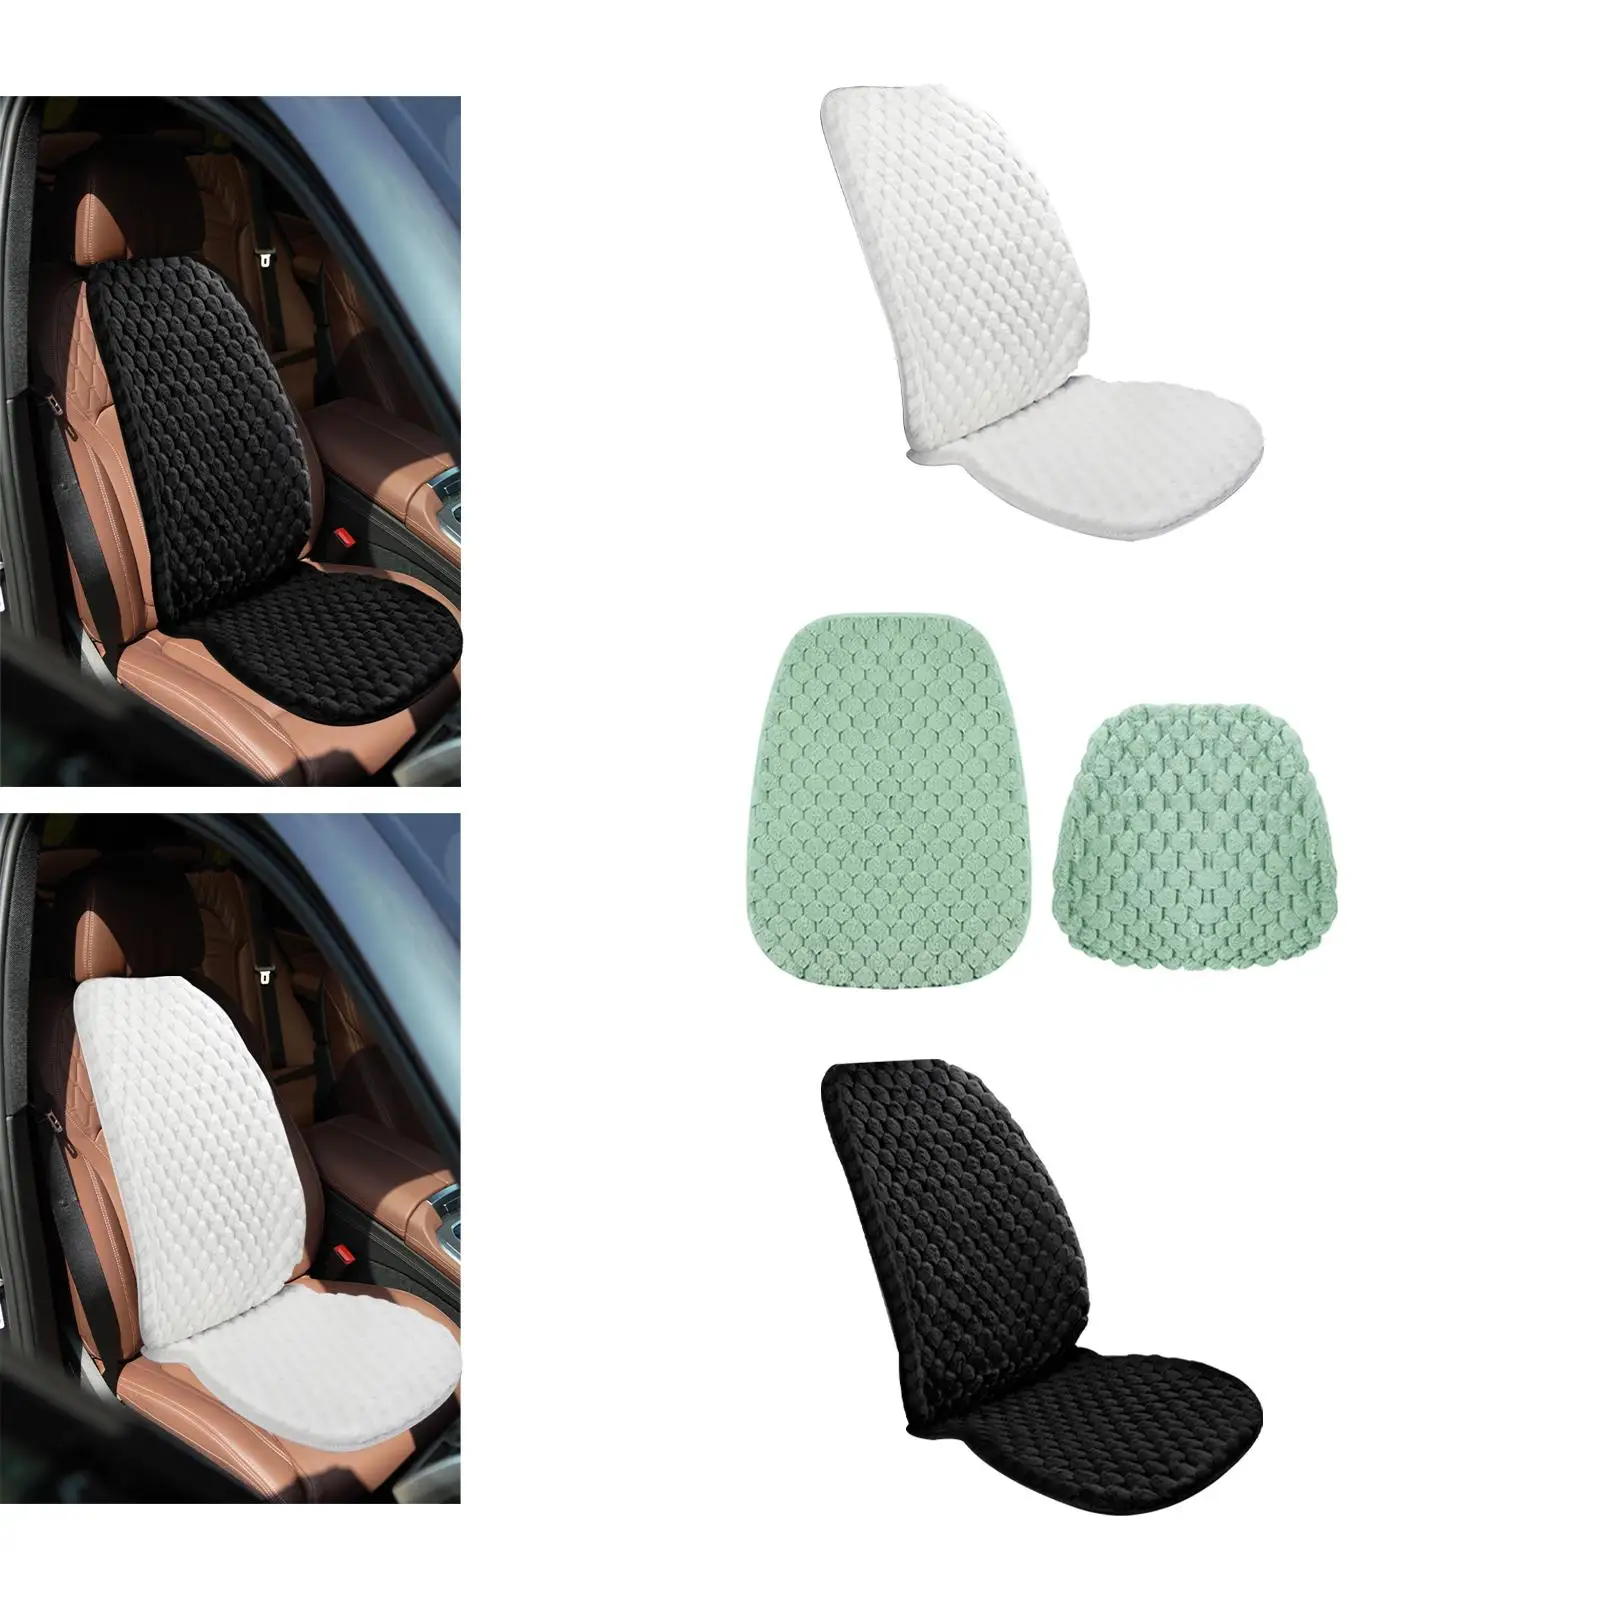 Car Seat Cover Universal Warm Anti Slip Mat for Truck Chair Office